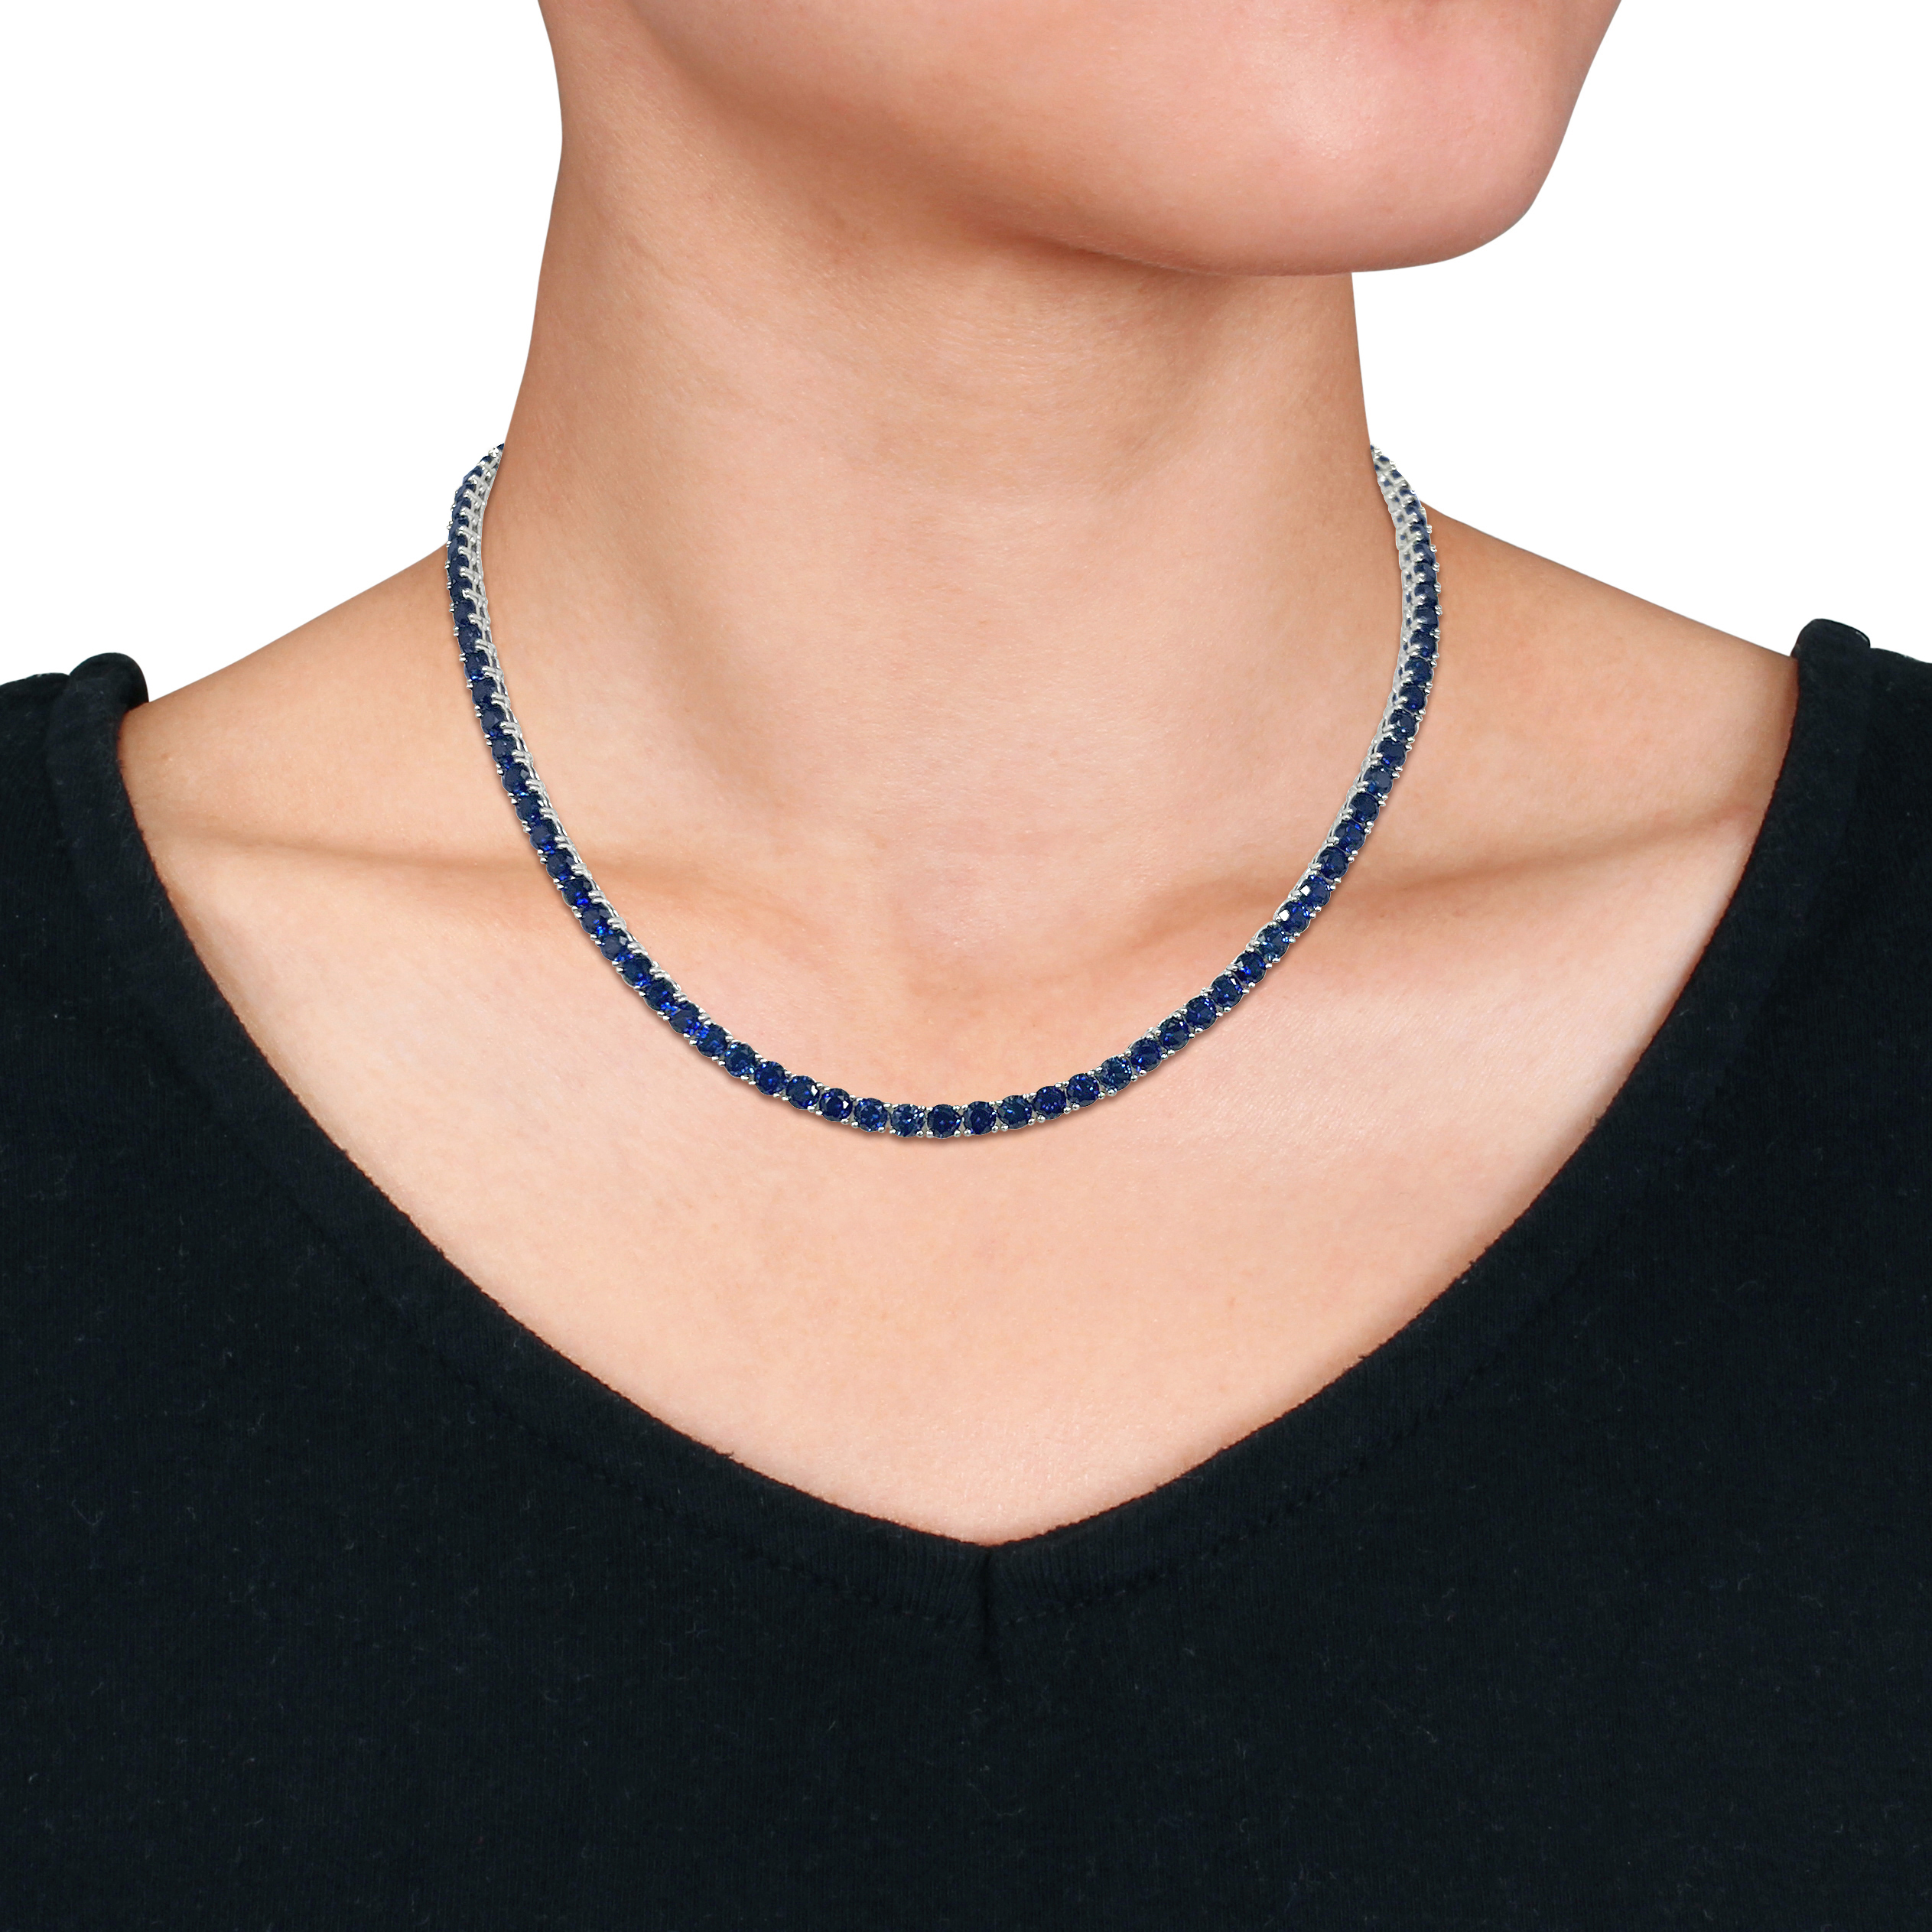 33 CT TGW Created Blue Sapphire Tennis Necklace in Sterling Silver - 17 in.